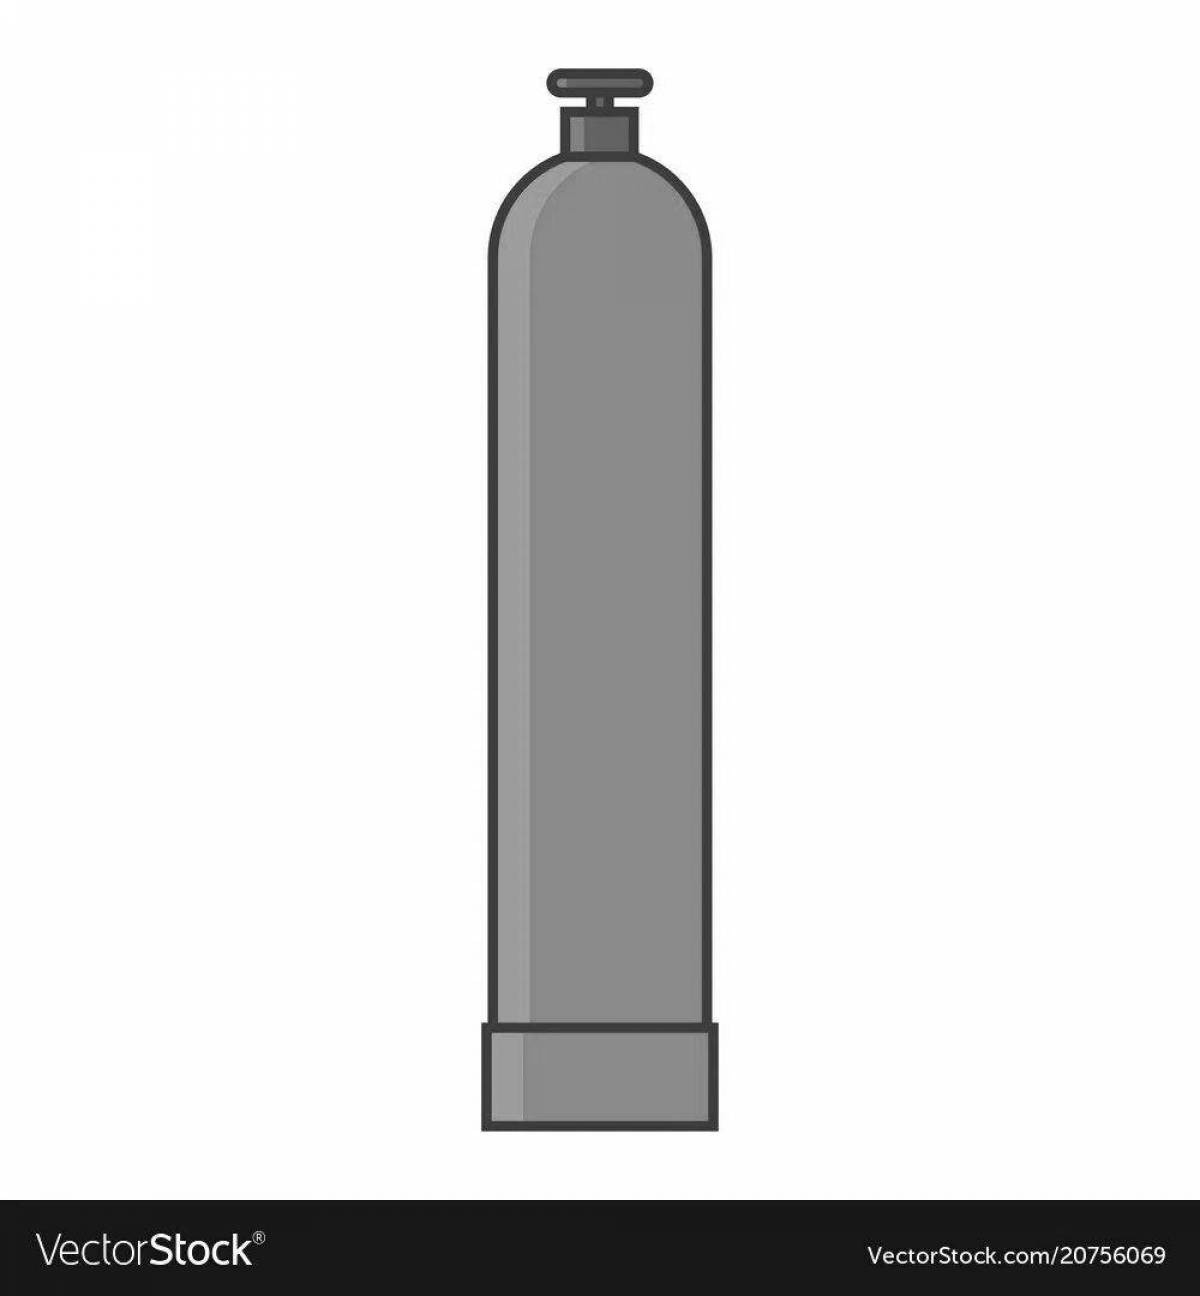 Attractive coloring of gas bottles